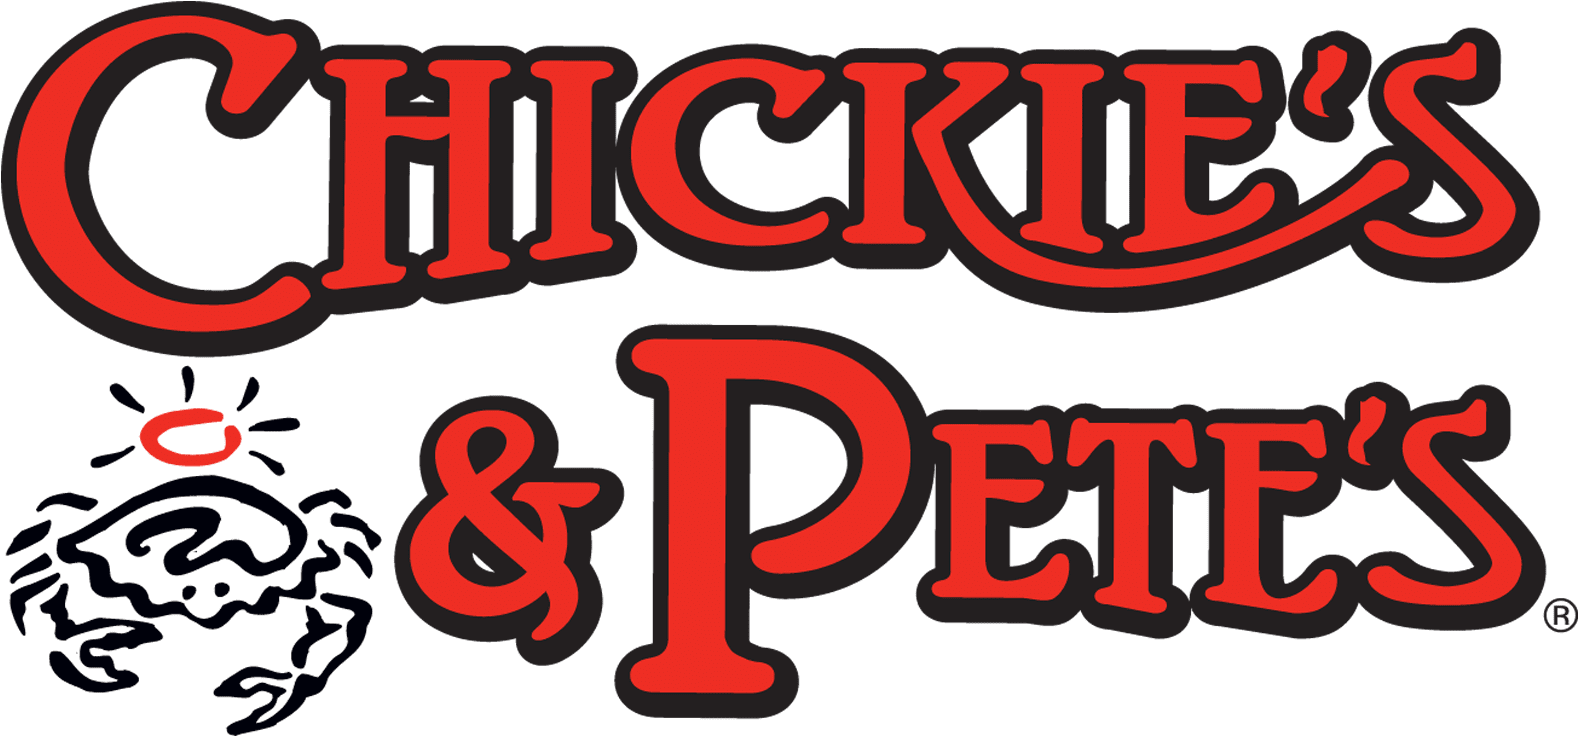 408-4086039_chickies-petes-chickies-and-petes-logo-clipart